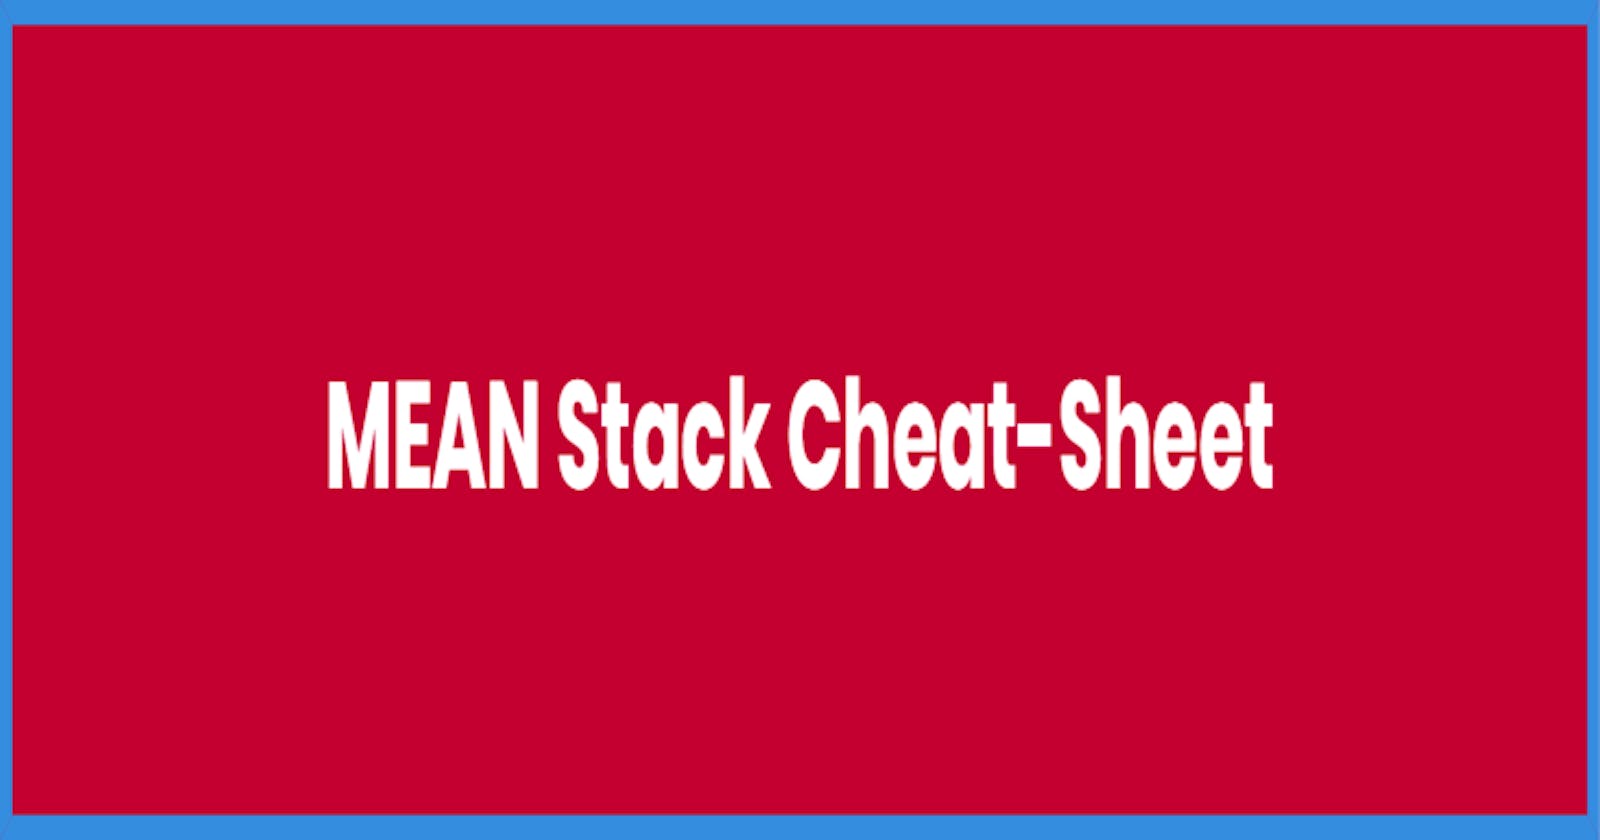 MEAN Stack - Cheat Sheet